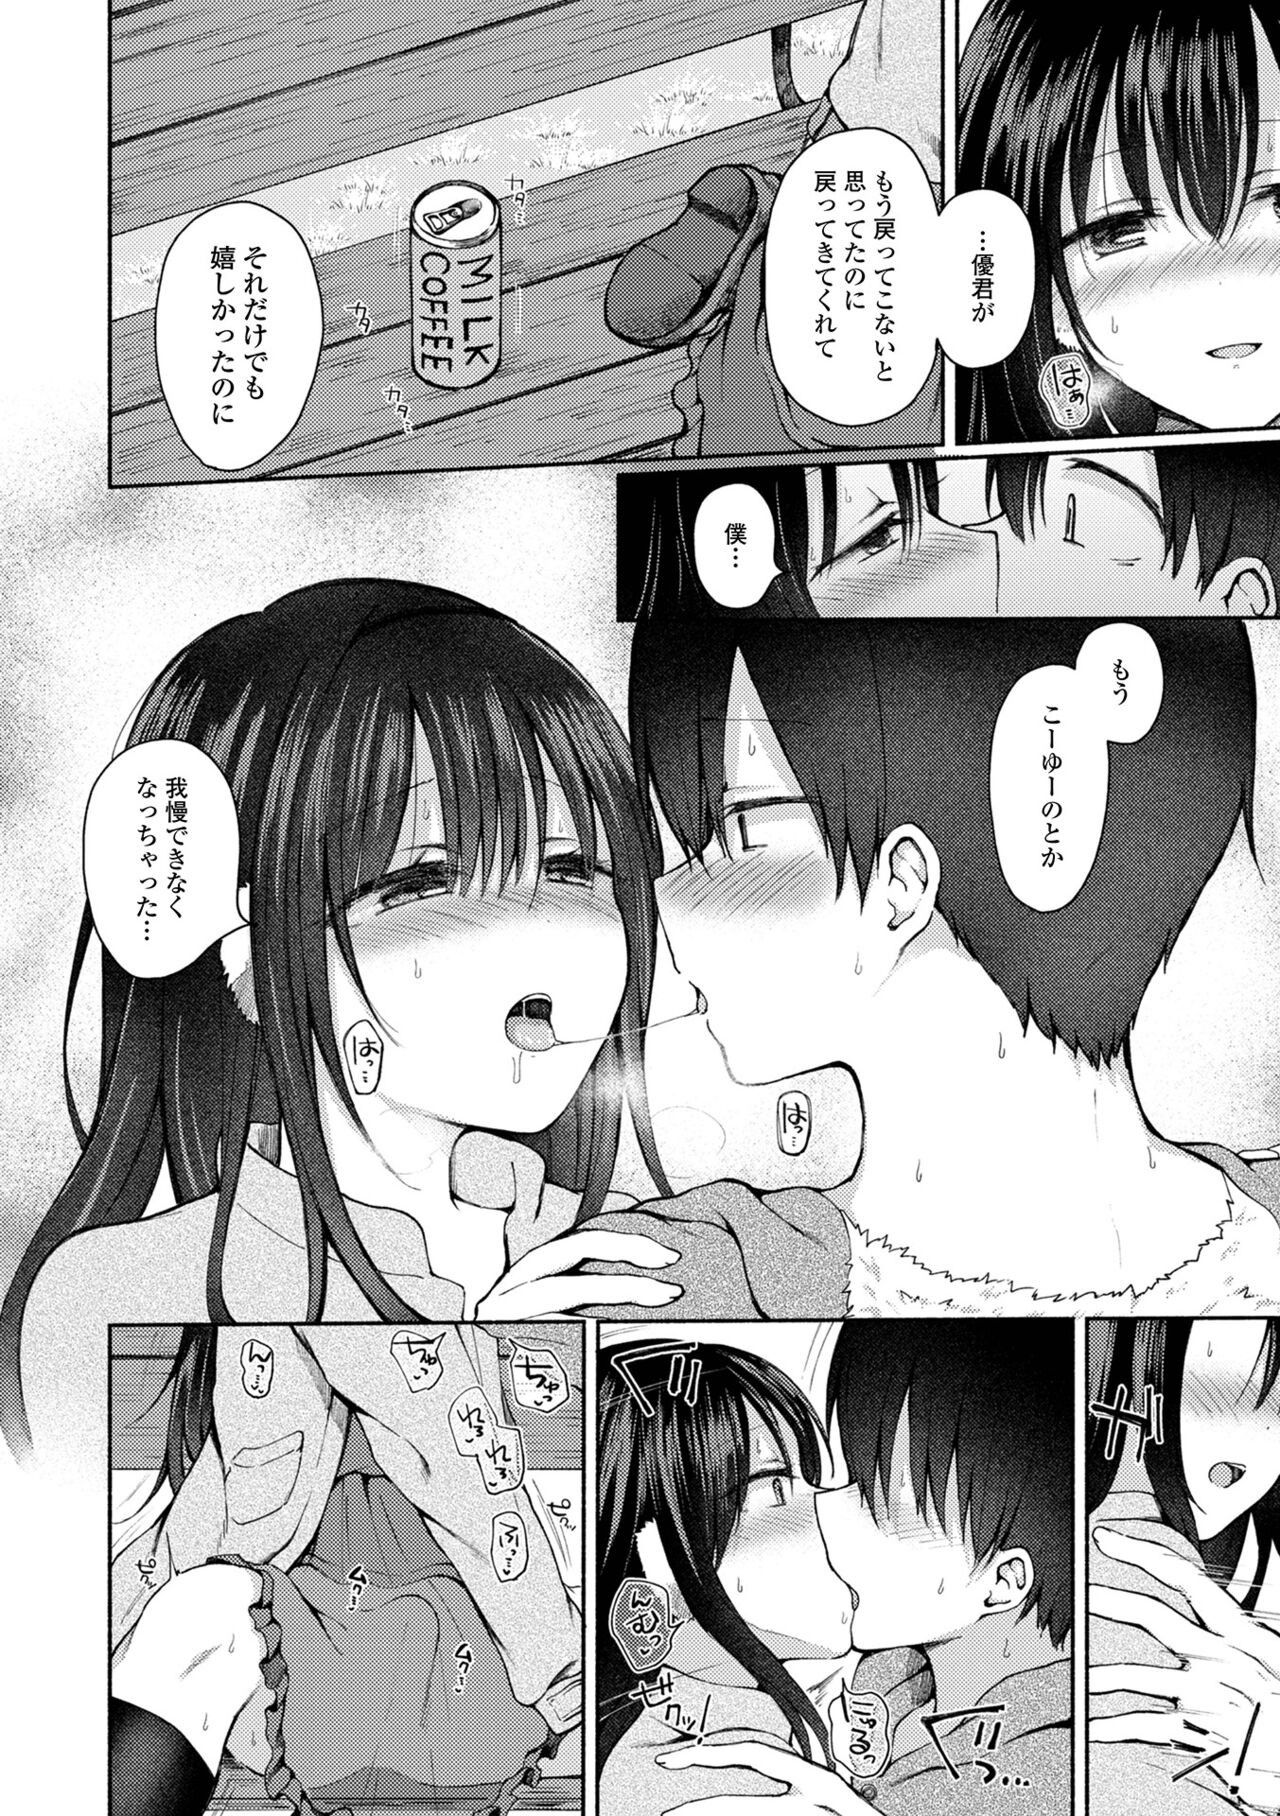 【Image】 Mr. Mann who saw the face of his childhood friend for the first time in a long time, becomes a female face www 4